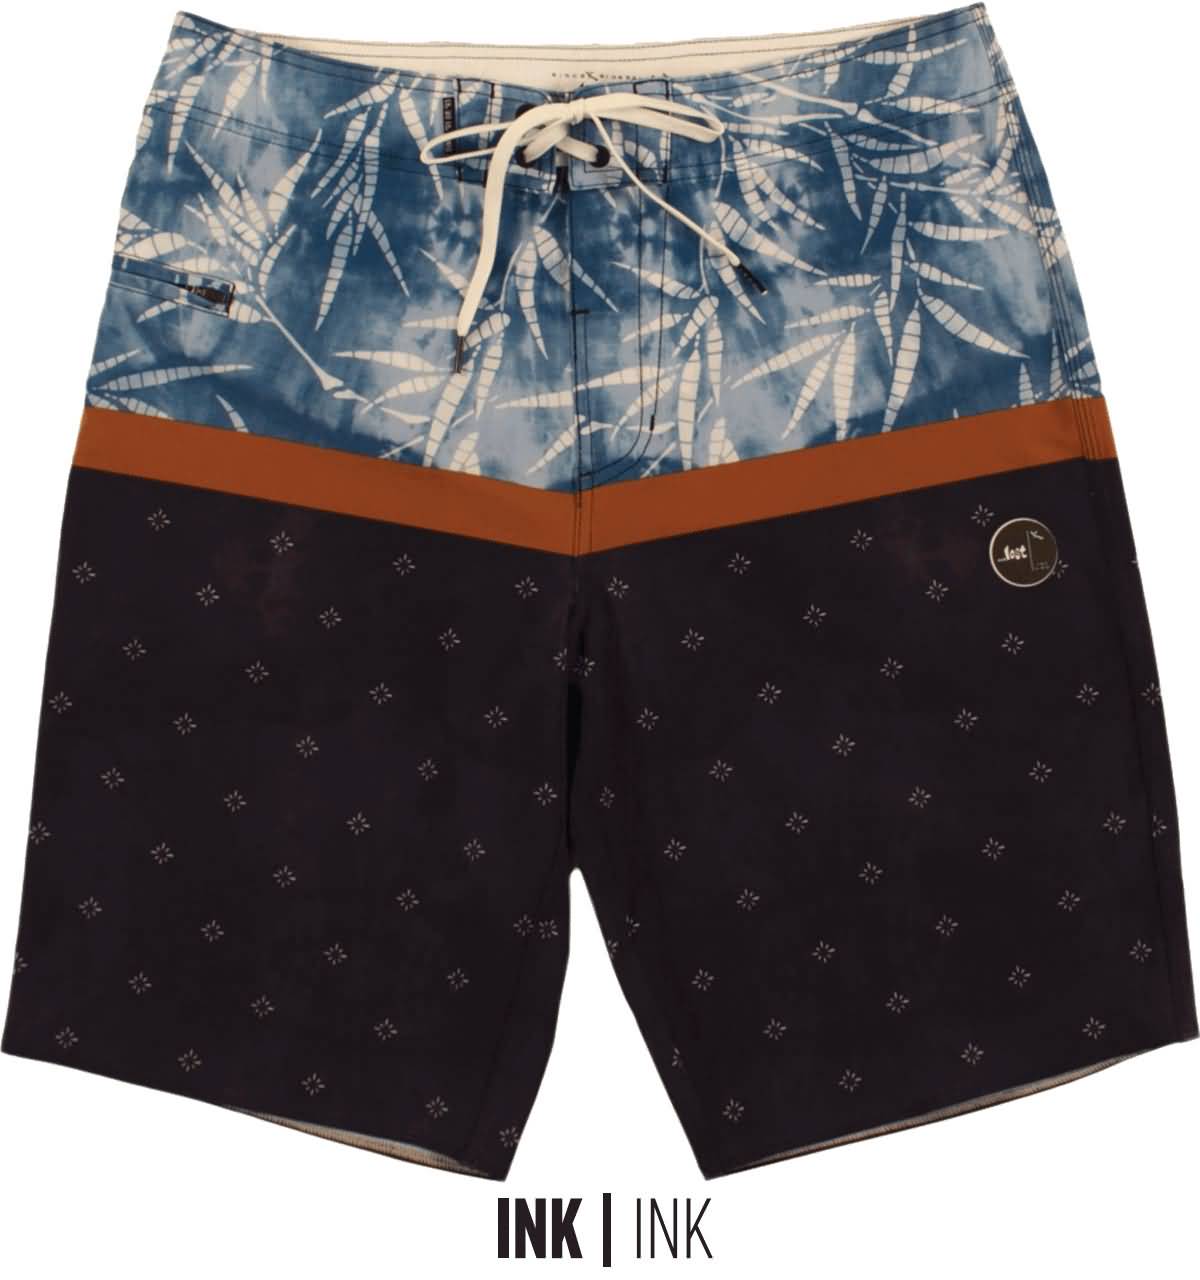 Lost Surf Fall 2017 Mens Beach Surfing Boardshorts Collection